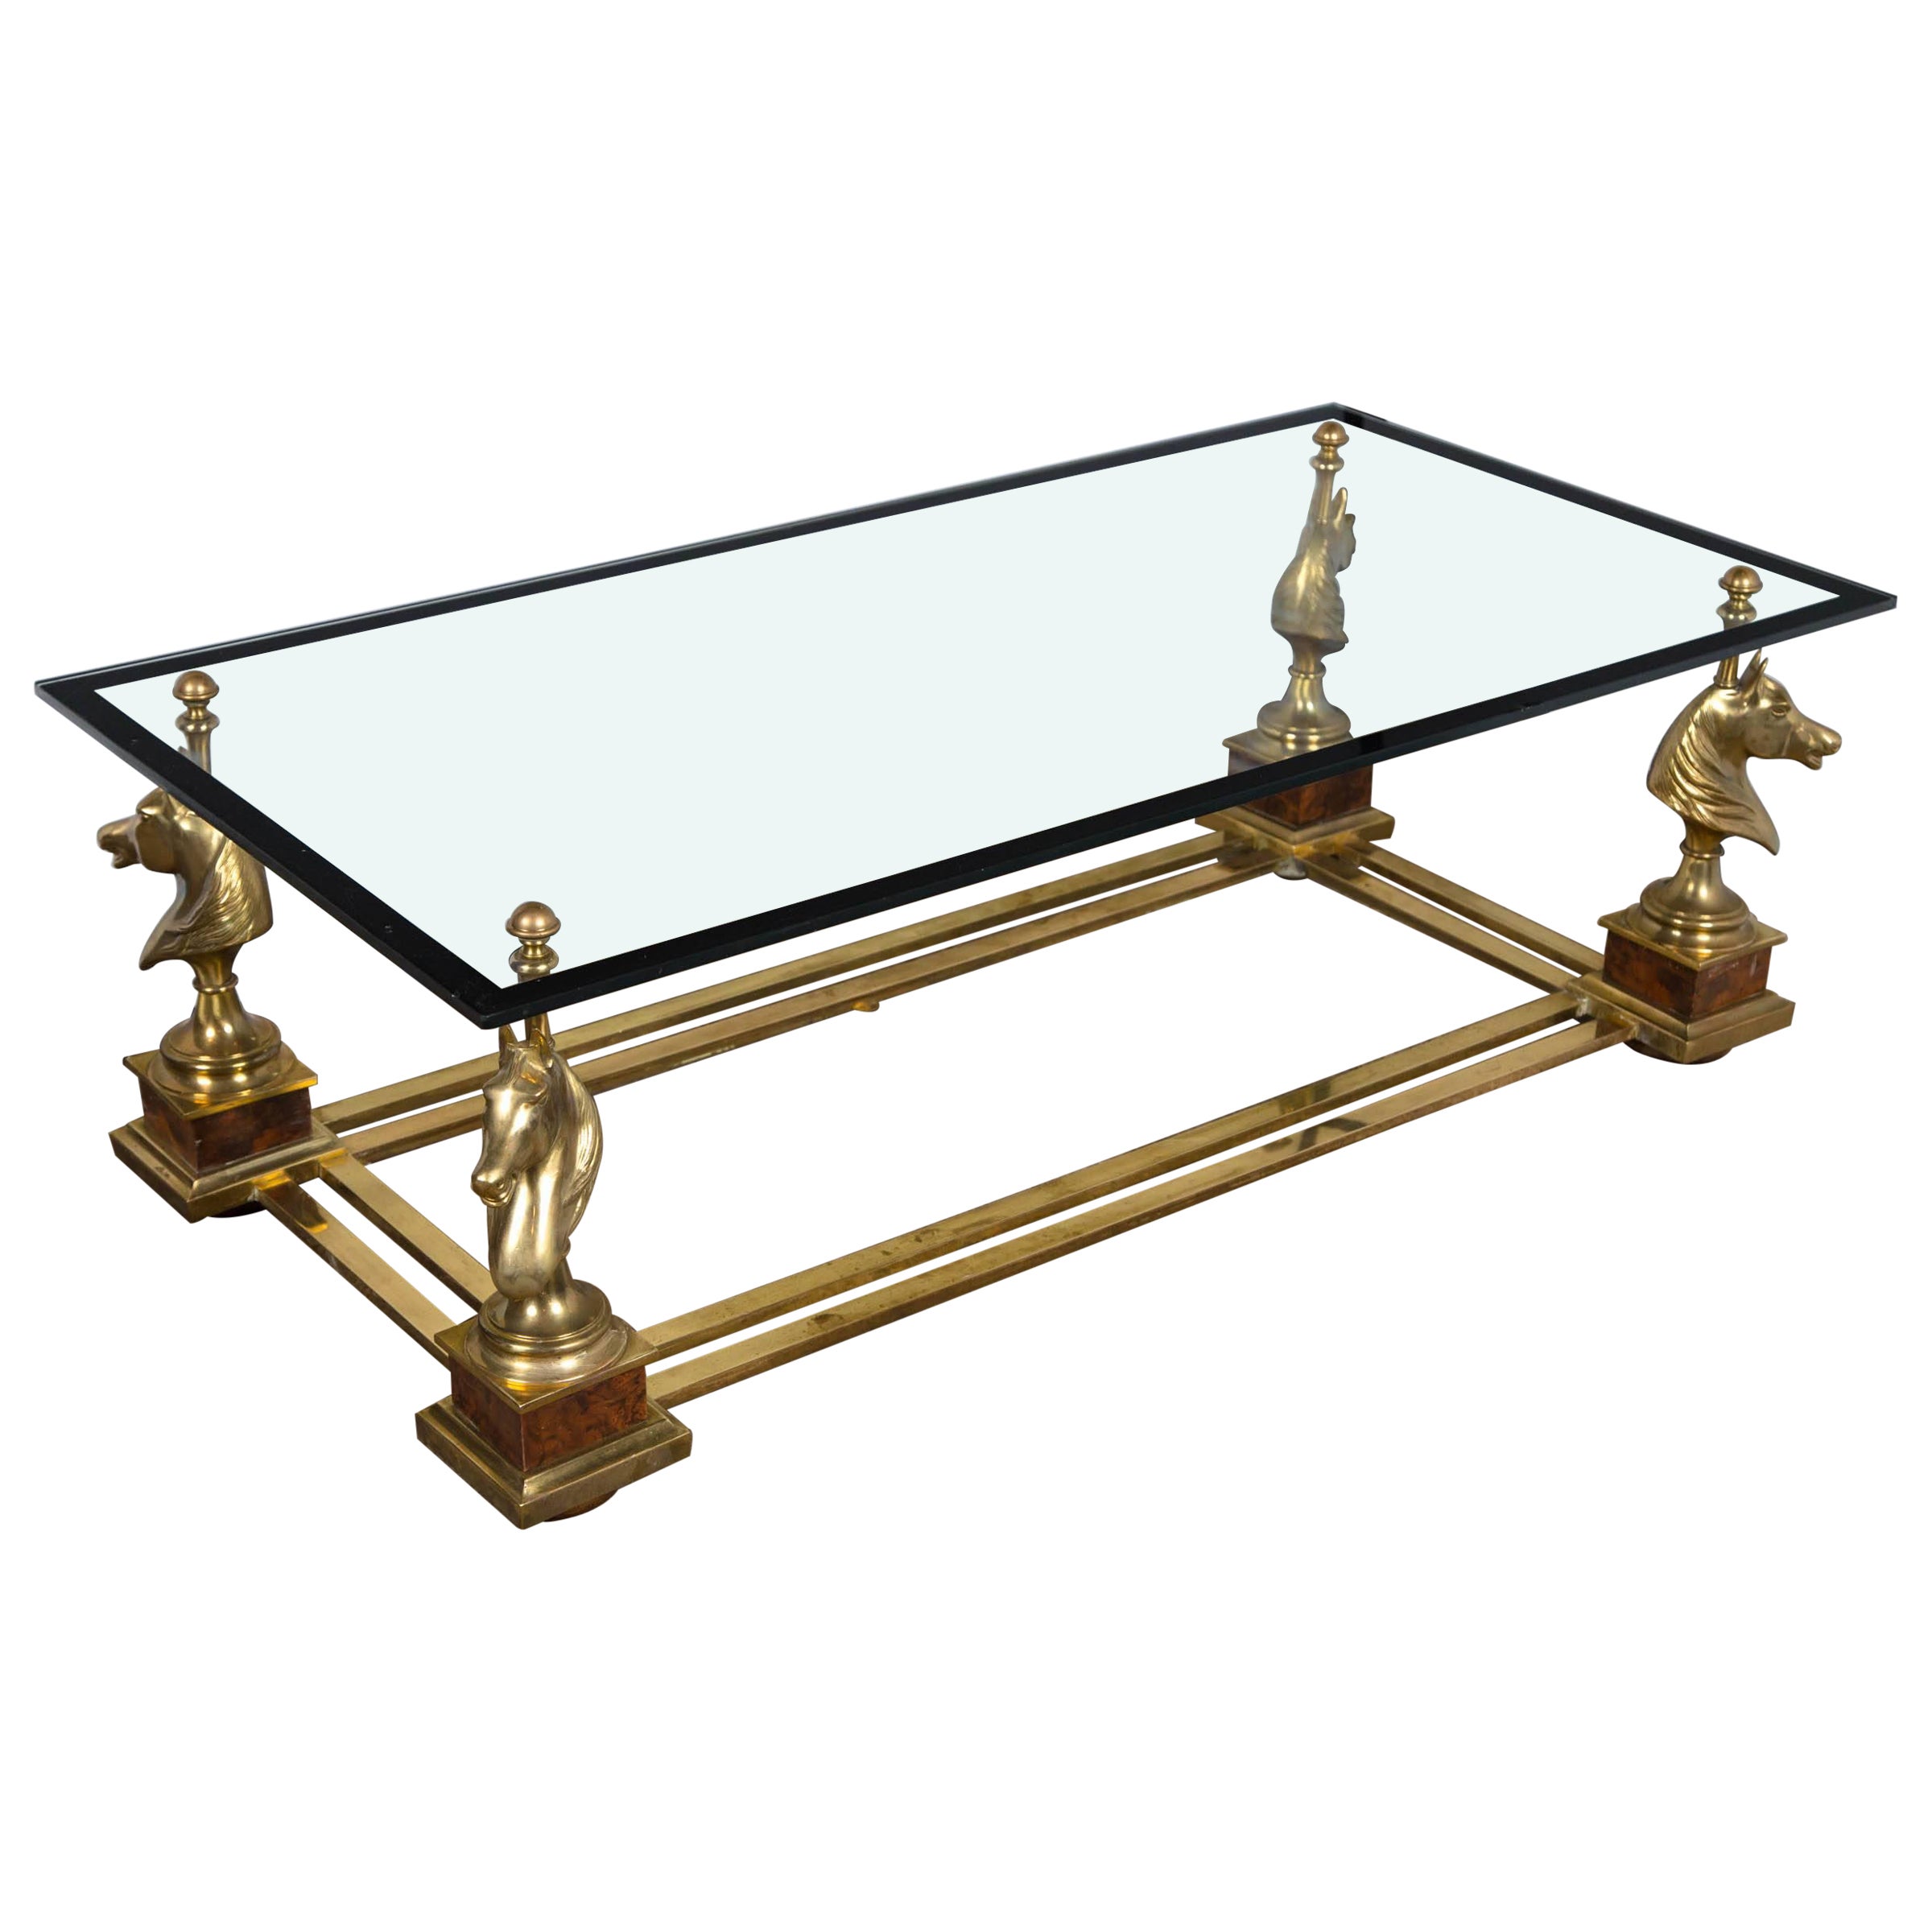 Brass "Cheval" Horse Head Coffee Table by Maison Charles, France